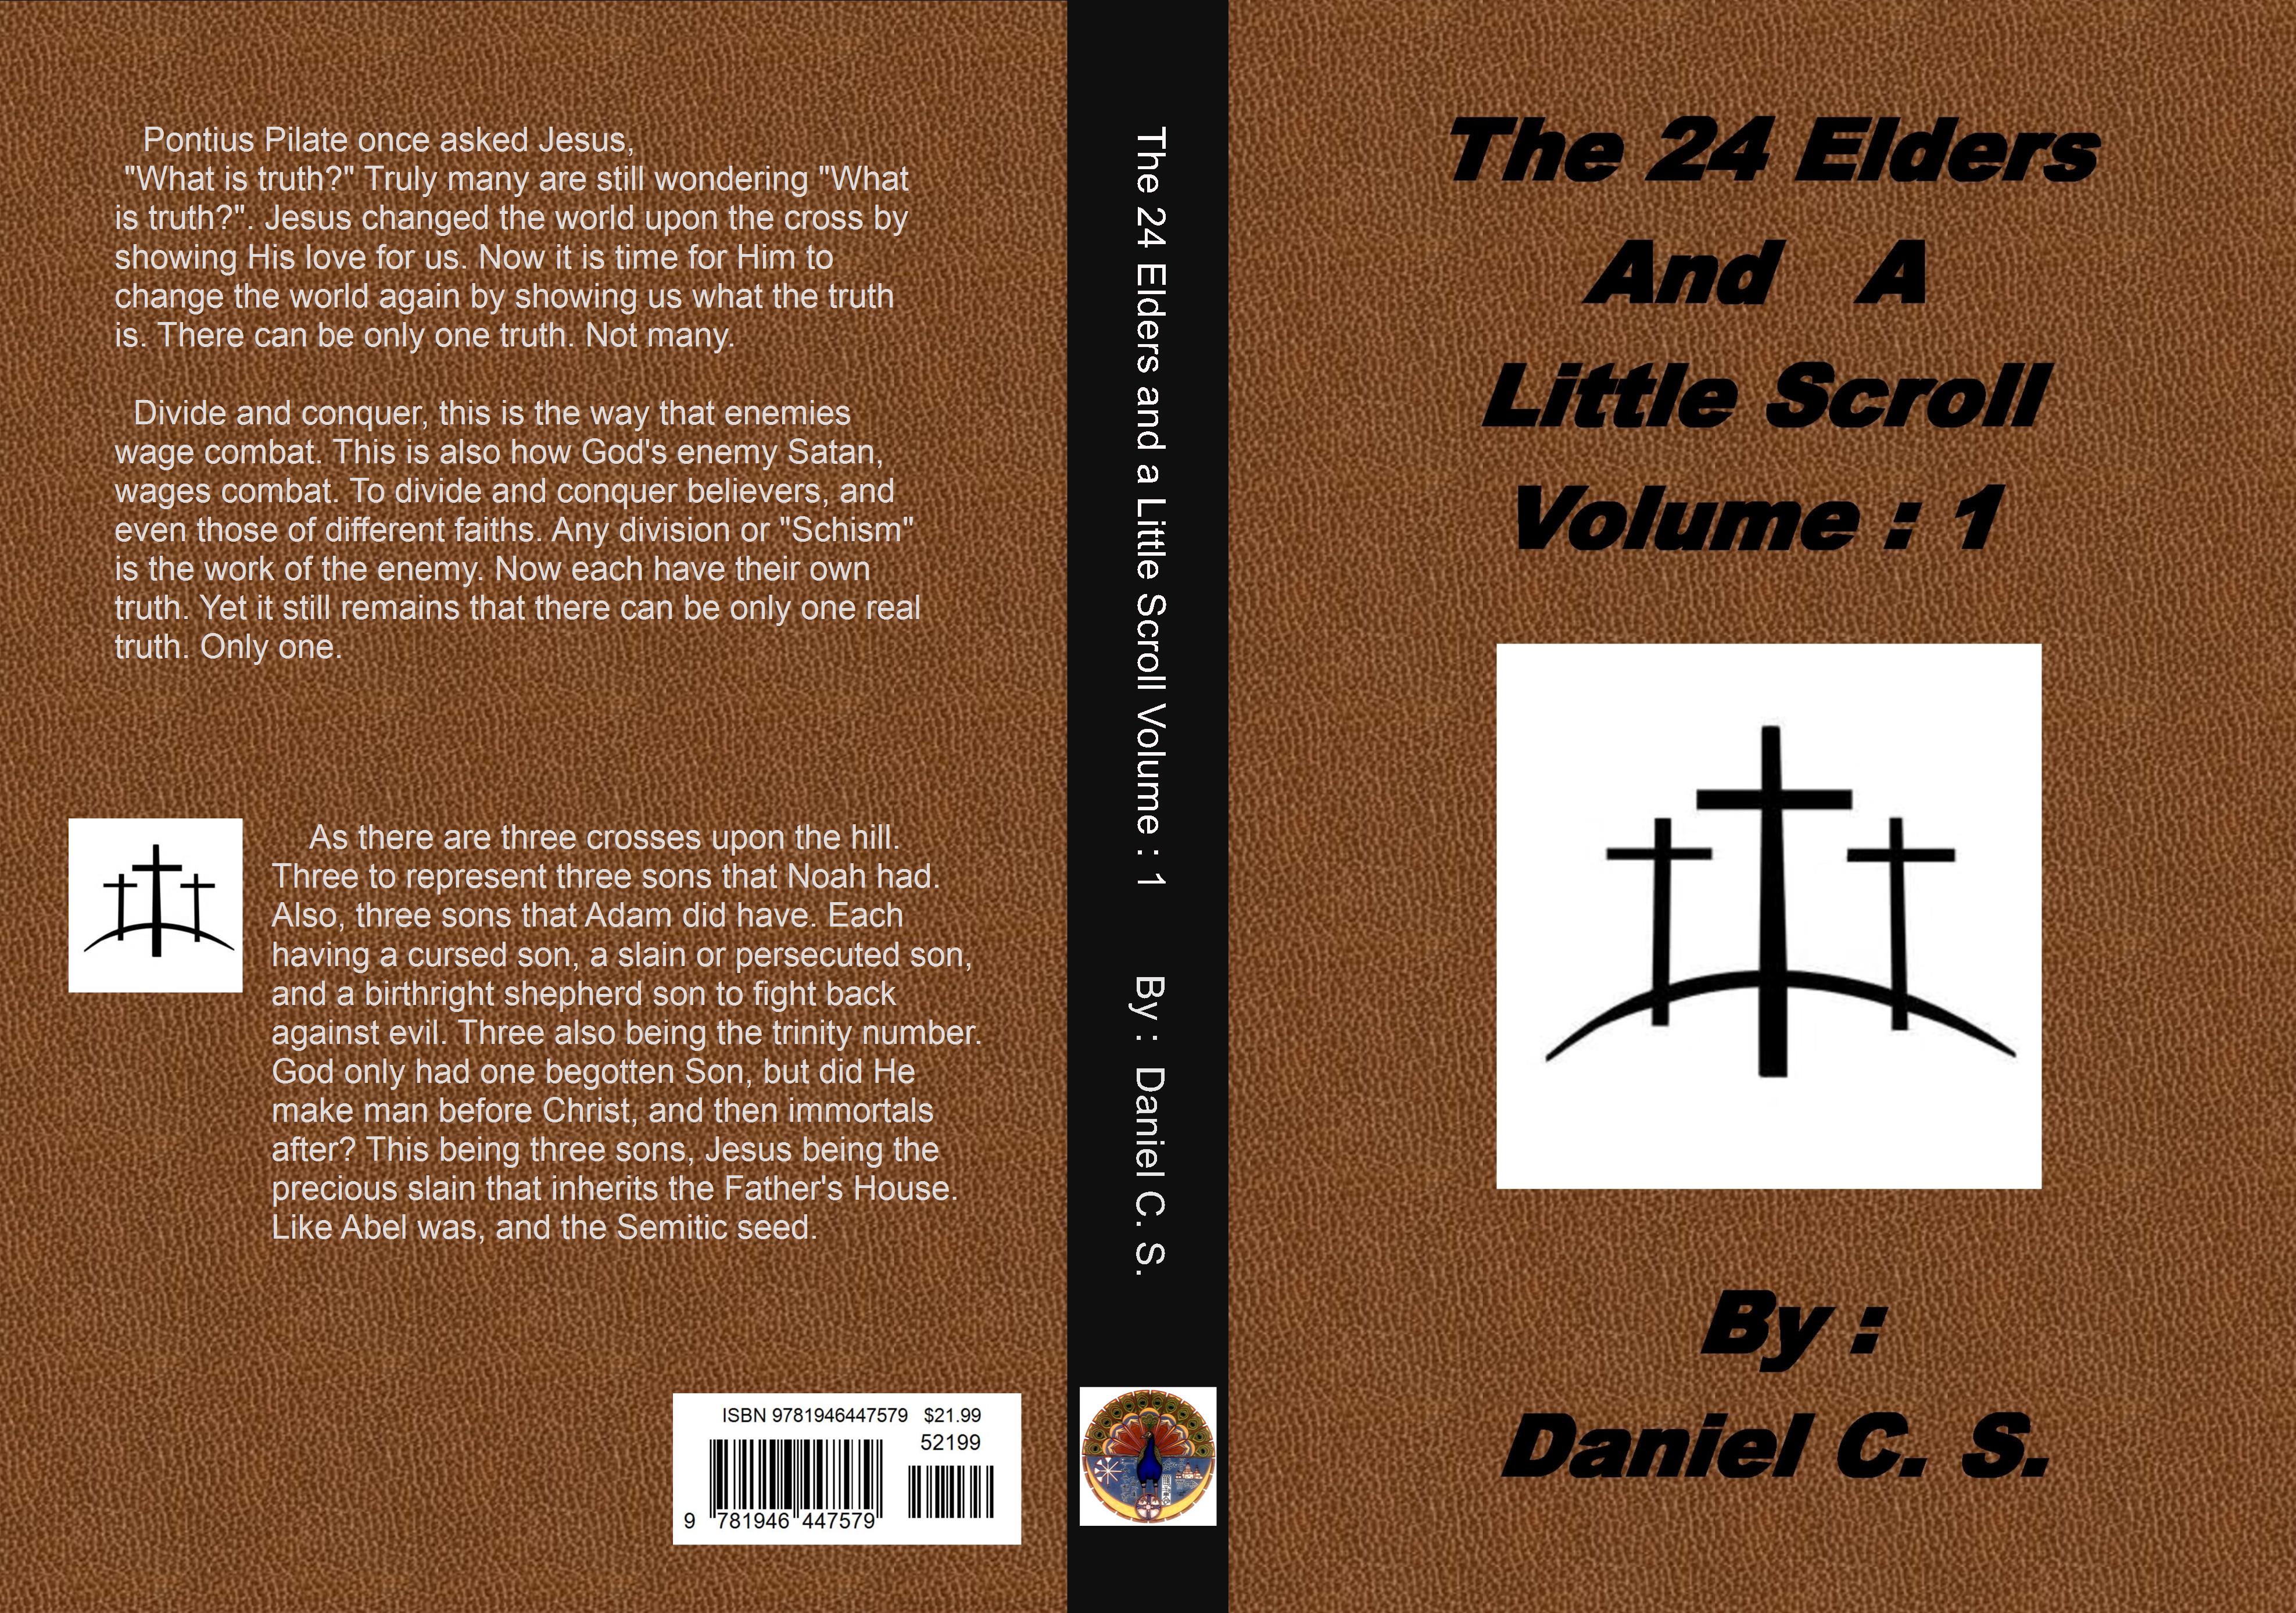  The 24 Elders and a Little Scroll Volume : 1 cover image